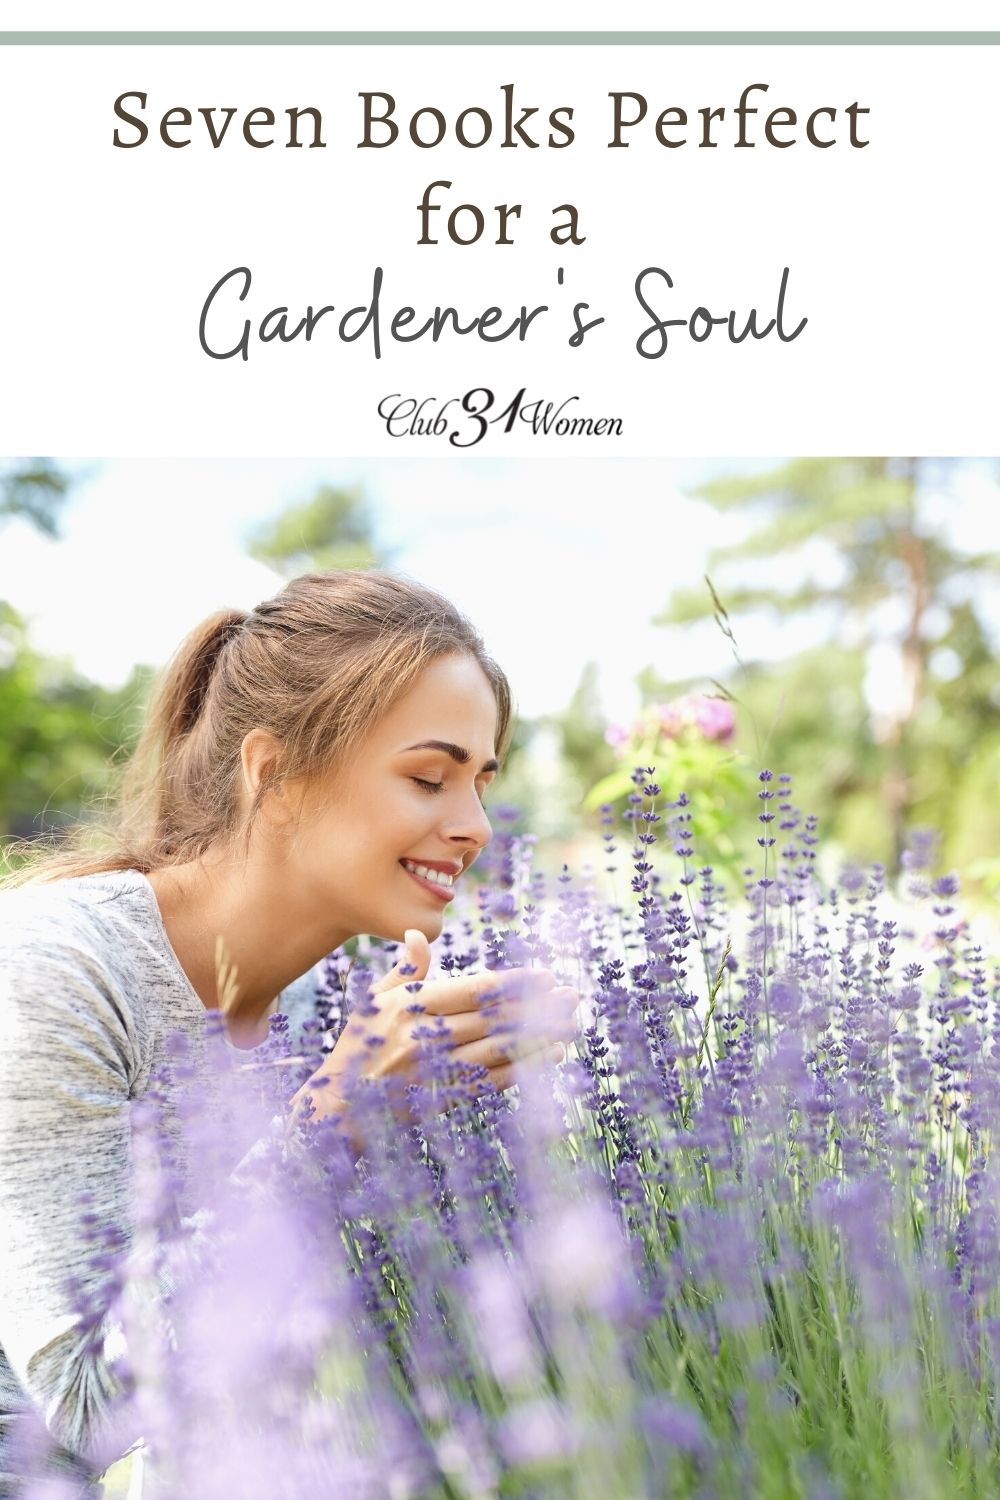 Being out in nature and breathing in God's creation is so life-giving! Every gardener's soul can be inspired by these lovely titles! via @Club31Women